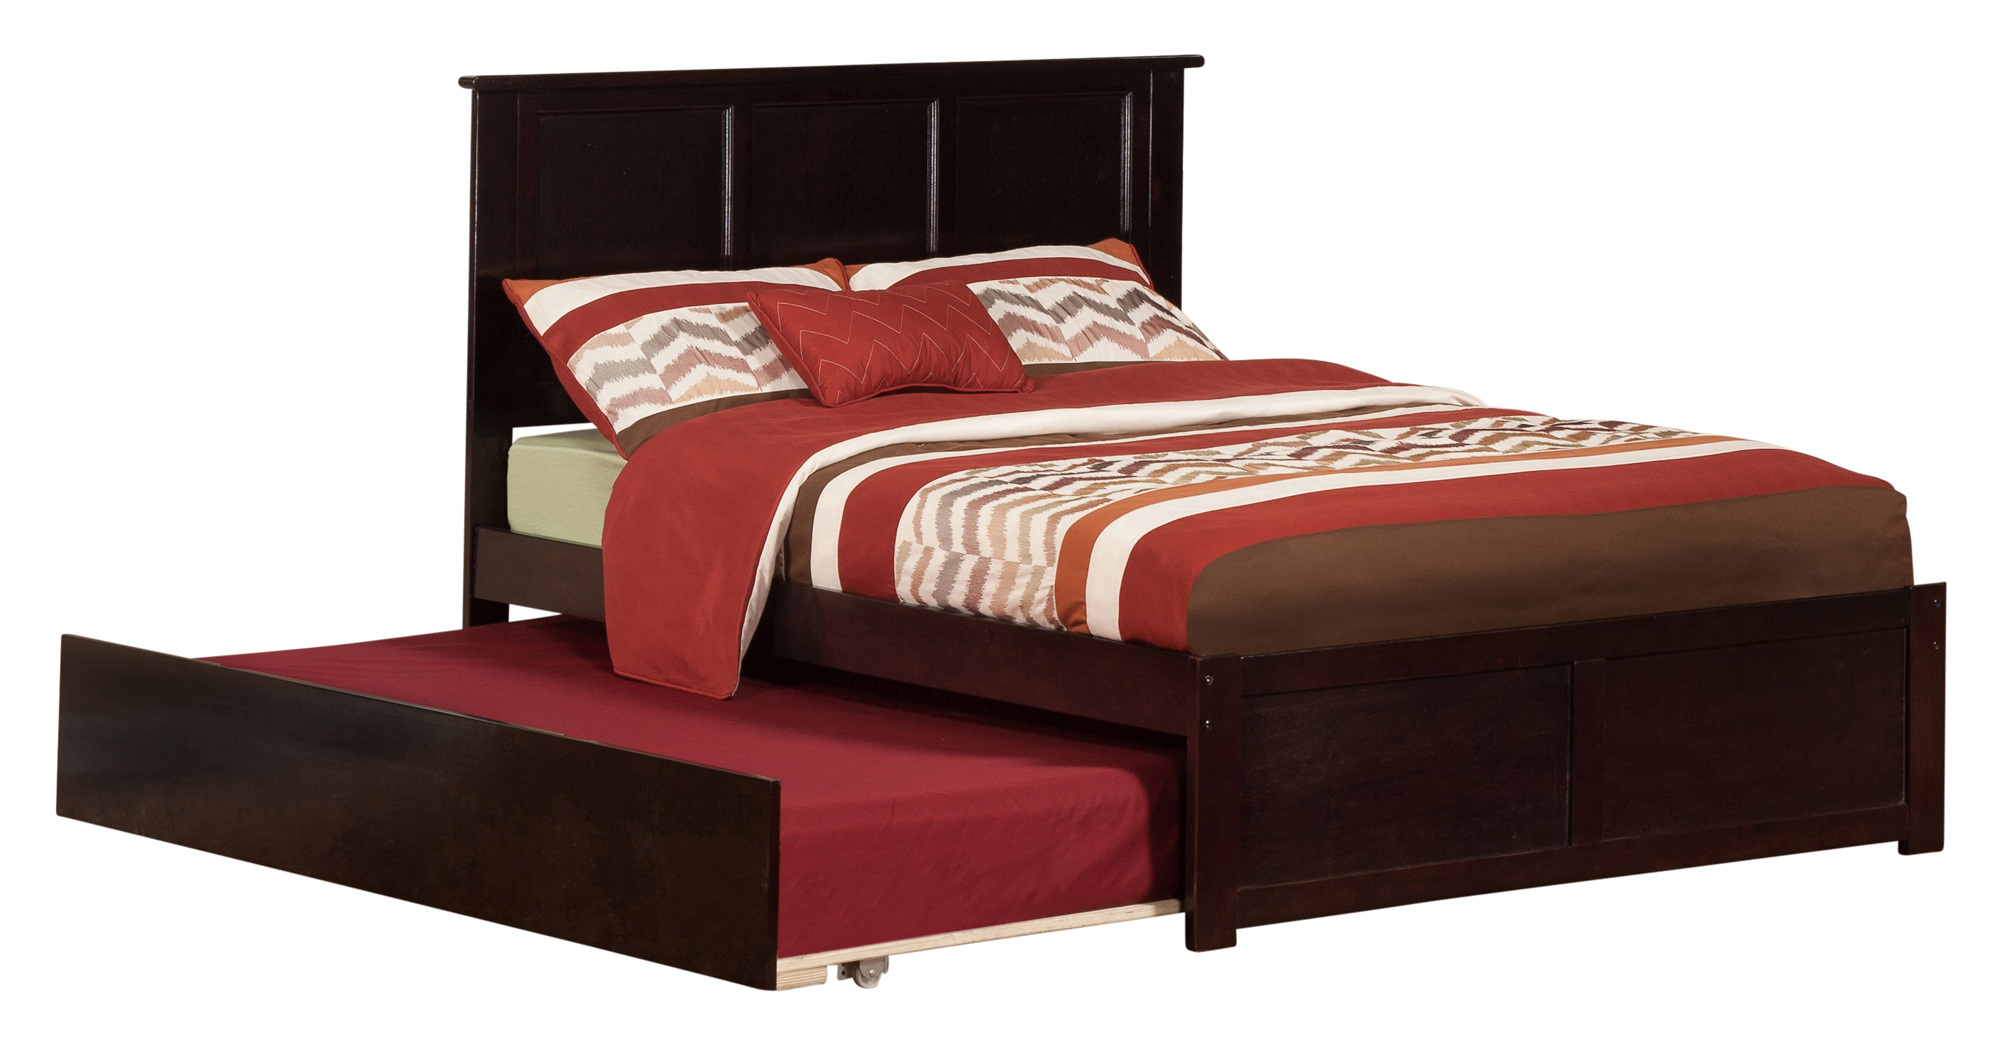 Madison Platform Bed with Flat Panel Foot Board and Twin Size Urban Trundle Bed in Multiple Colors and Sizes - image 1 of 4